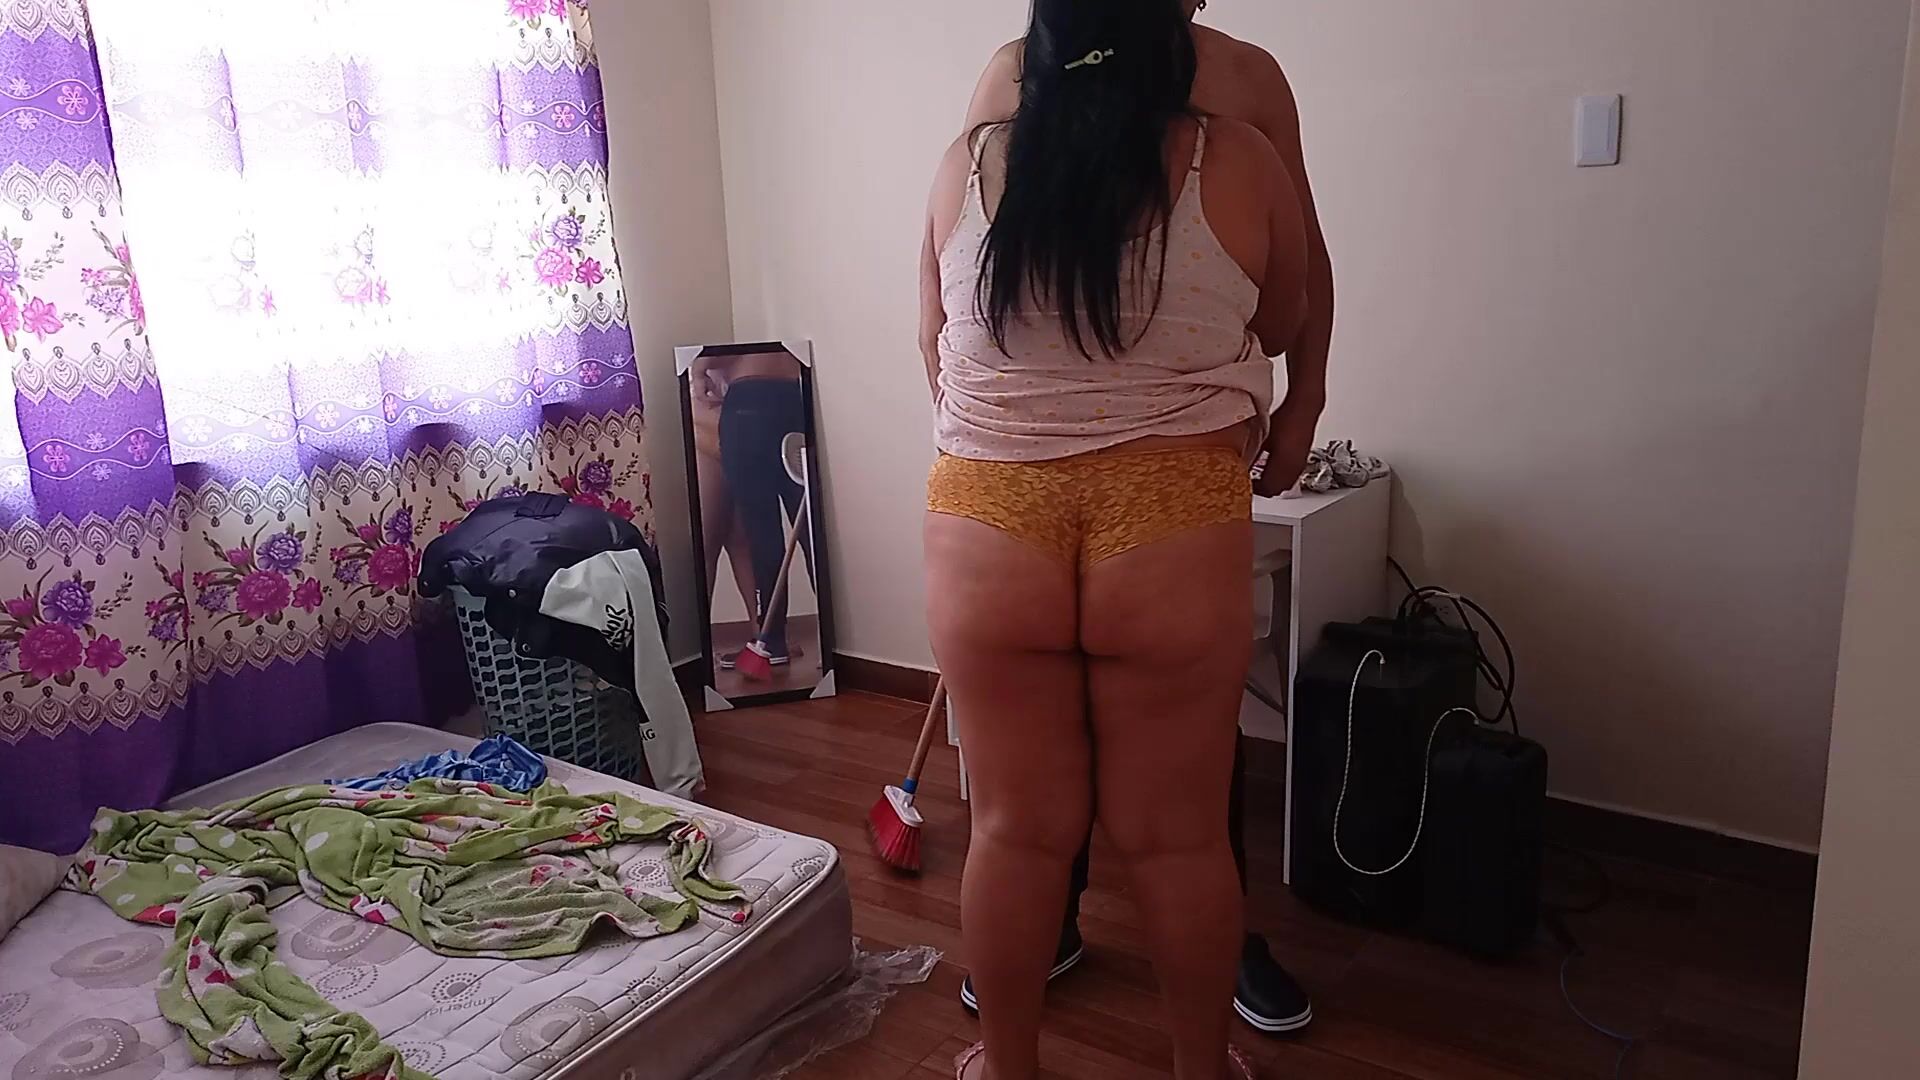 The cleaning girl enters my room and I manage to seduce her I put a hidden camera I record all that fucking that Chubby so rich very good blowjob watch online